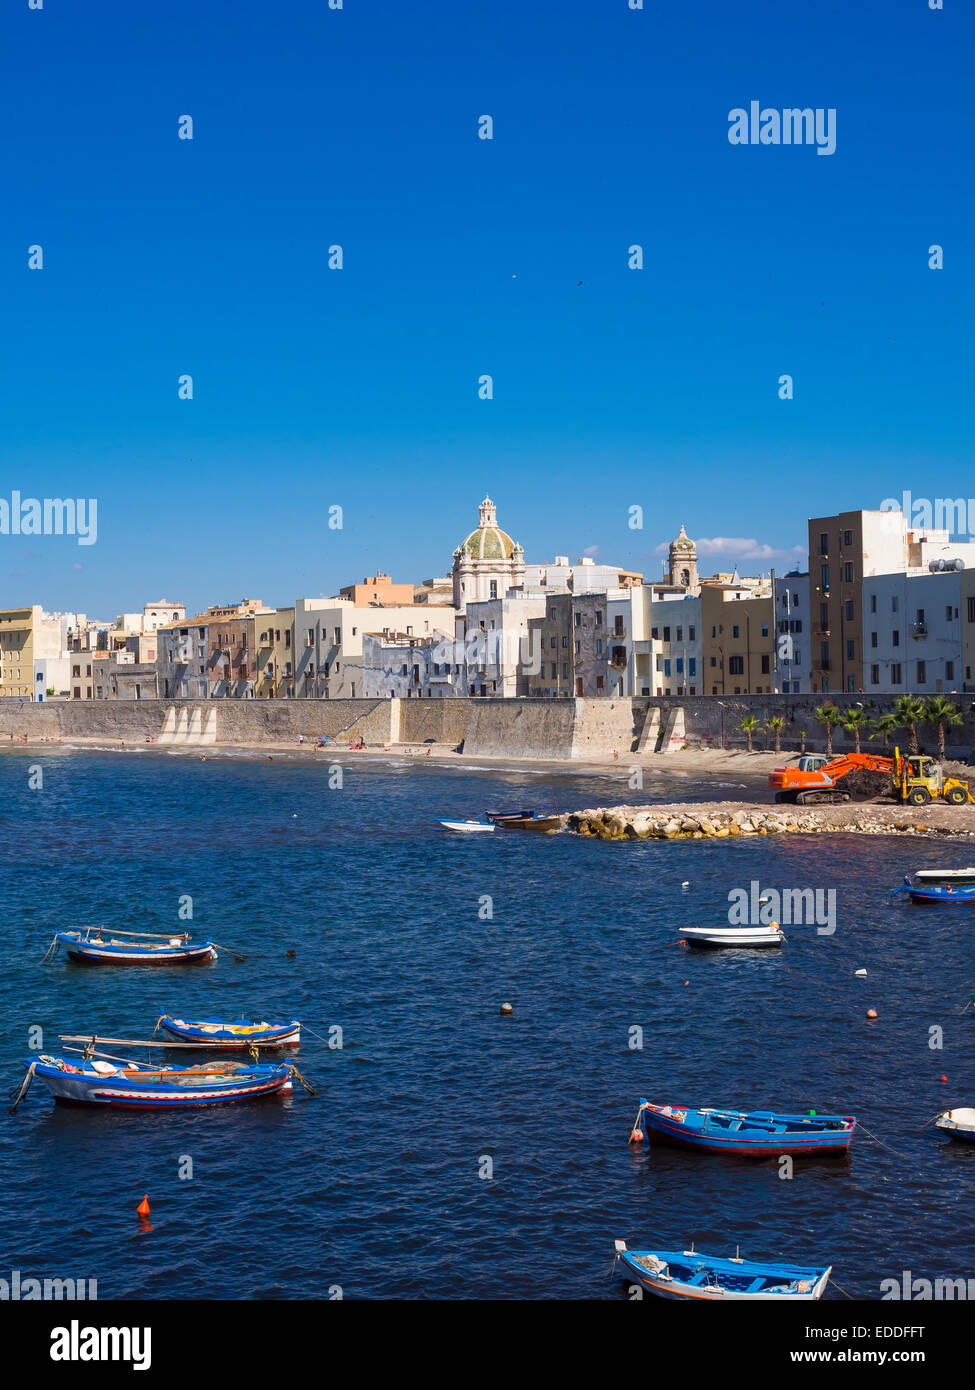 Italy, Sicily, Province of Trapani, Trapani, Old town, Harbour and Via Mura di Tramontana Ovest Stock Photo